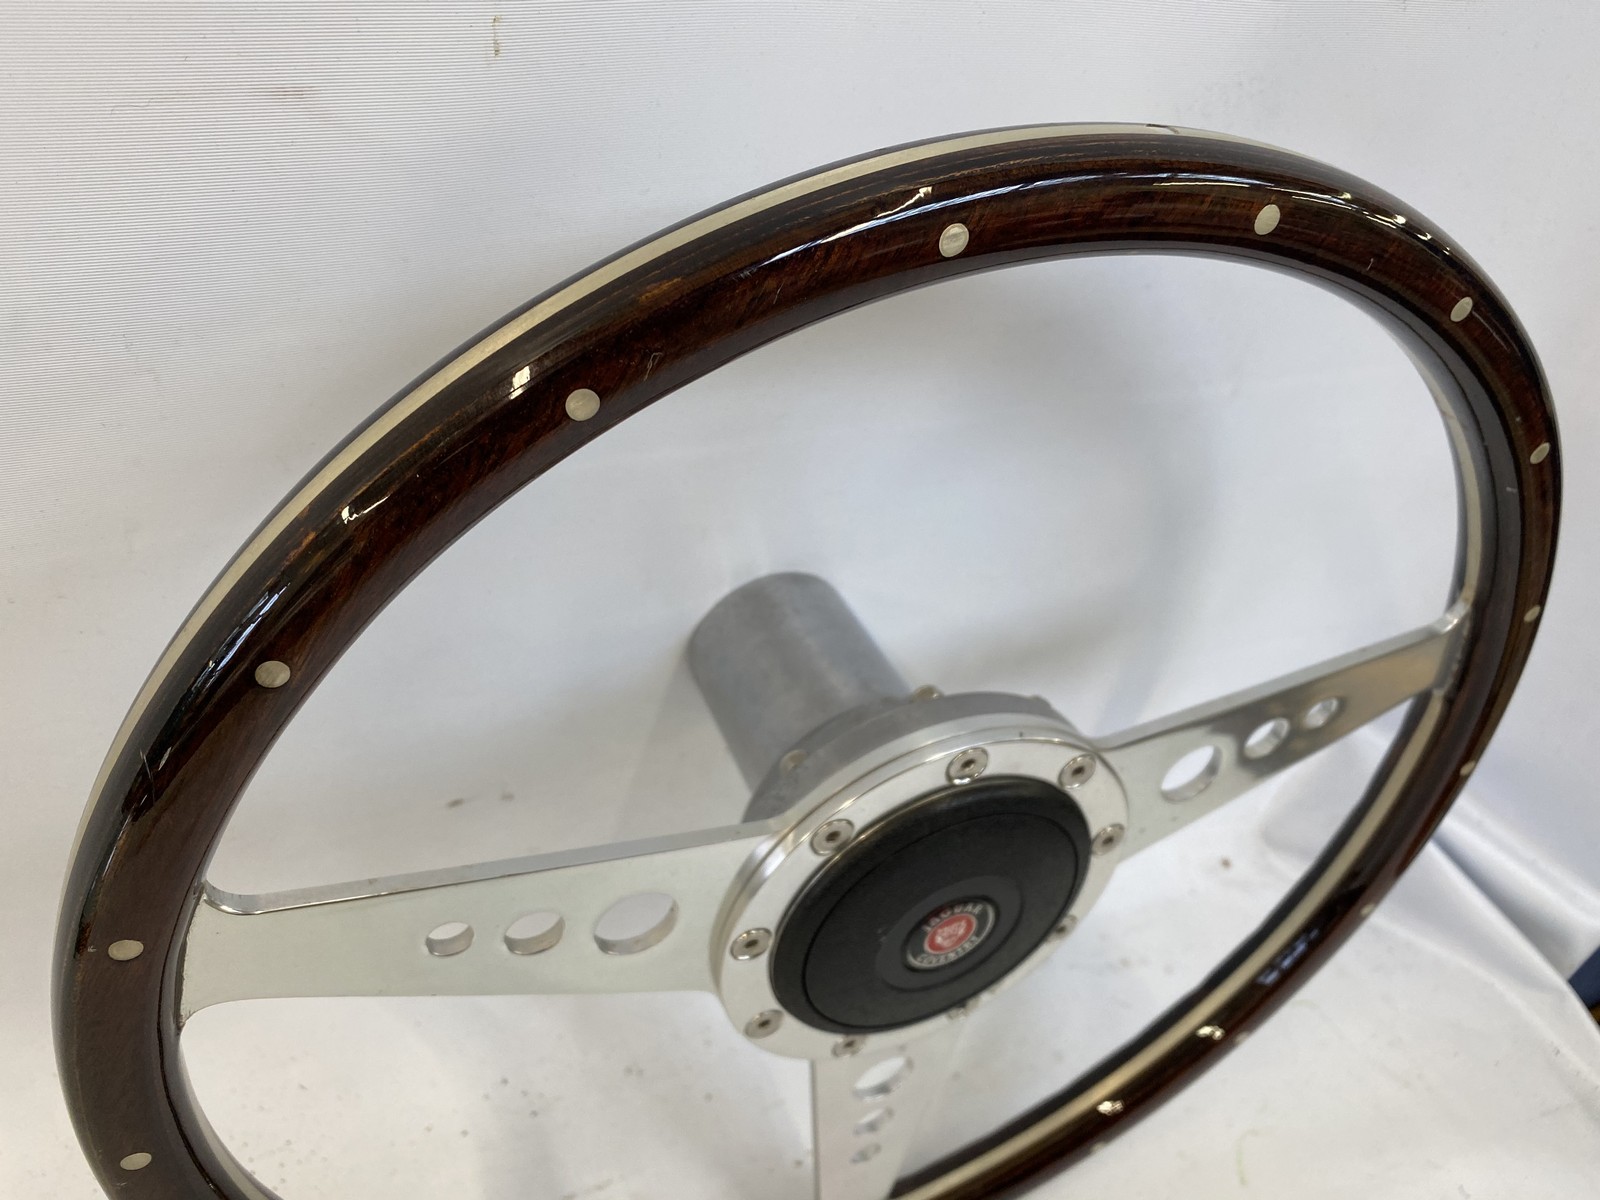 A good quality Jaguar three spoke aluminium and wooden rimmed steering wheel in excellent - Image 2 of 3